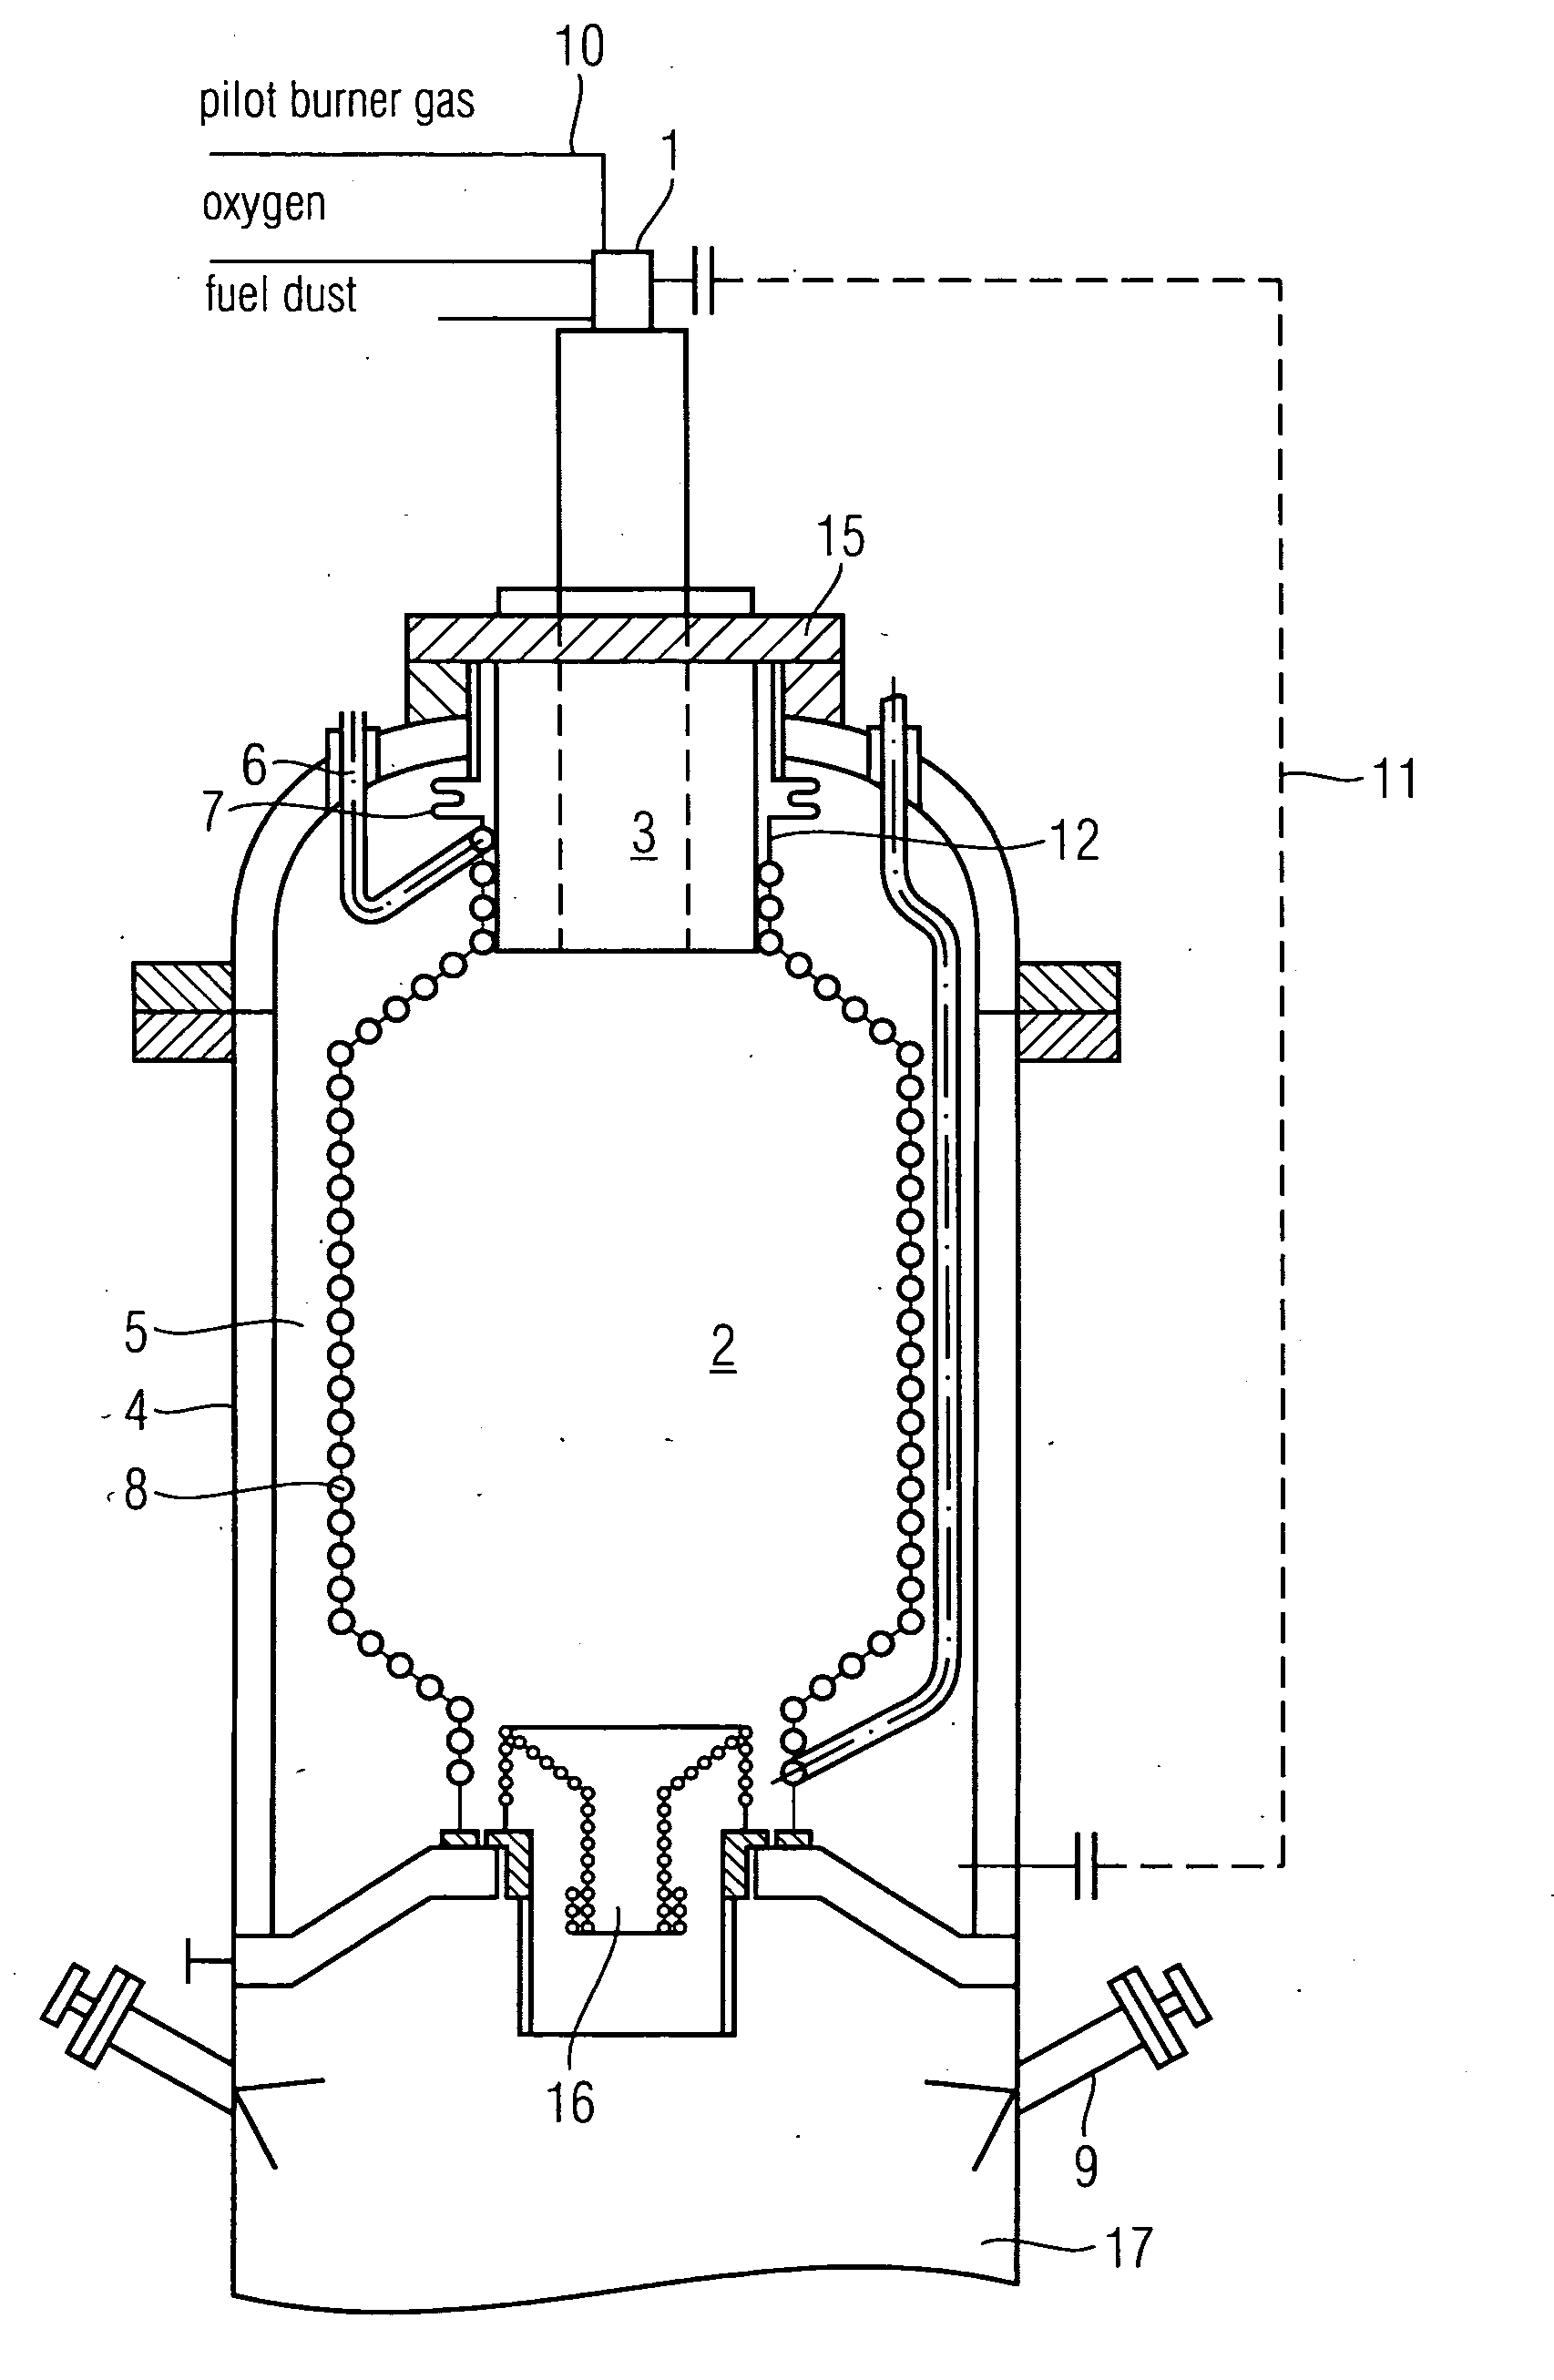 Entrained-flow gasifier with cooling screen and bellows compensator